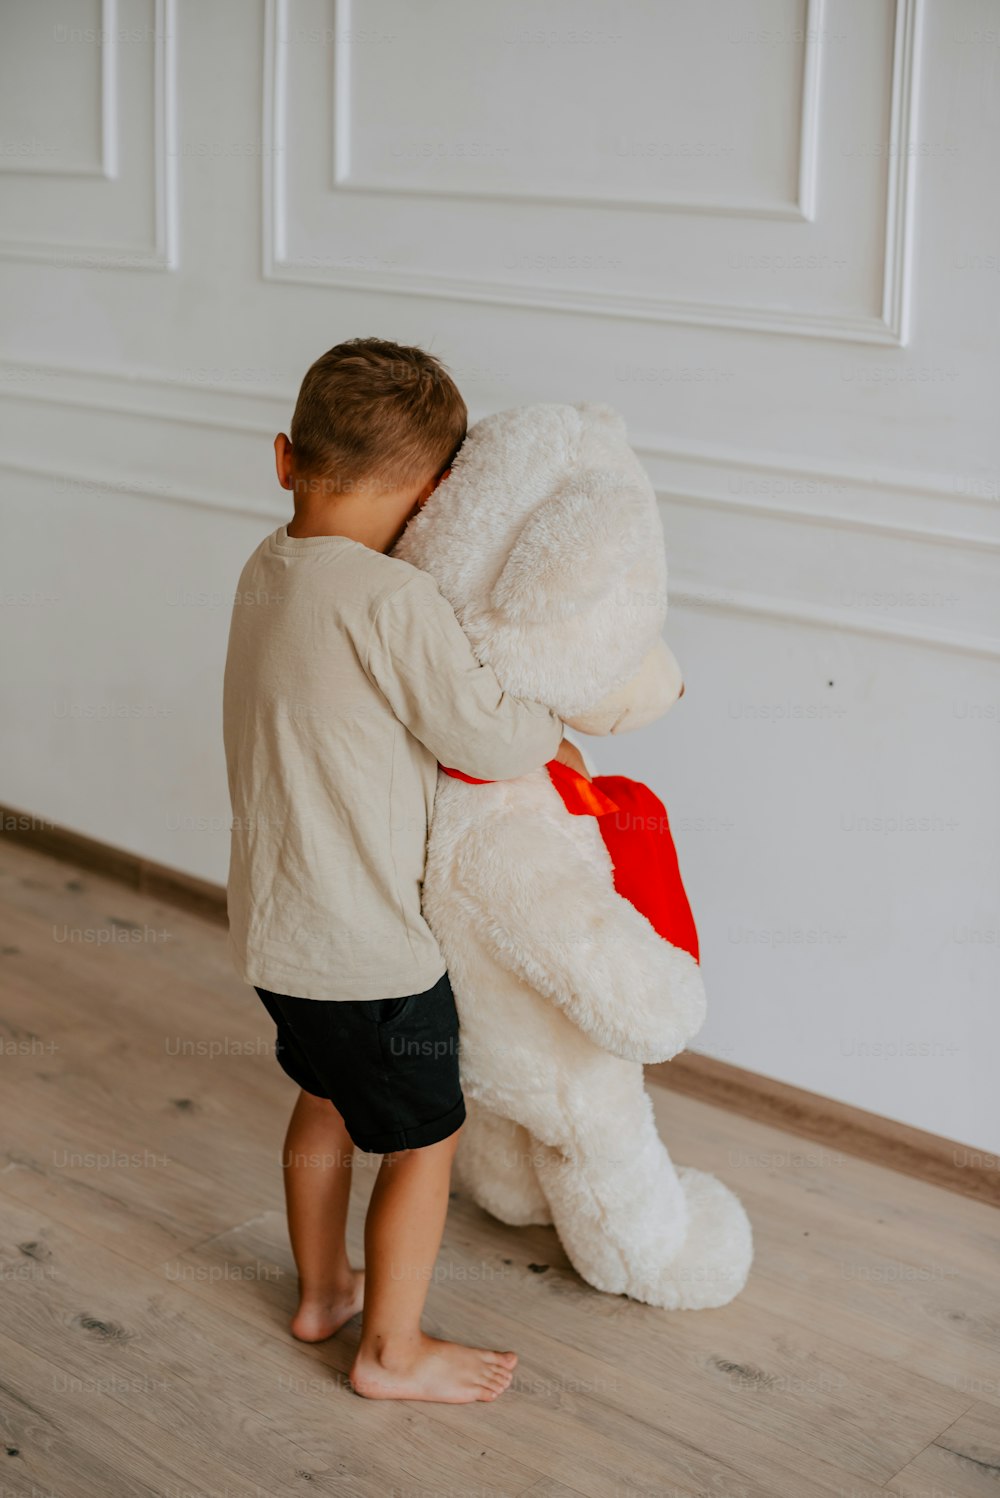 a young boy holding a large white teddy bear